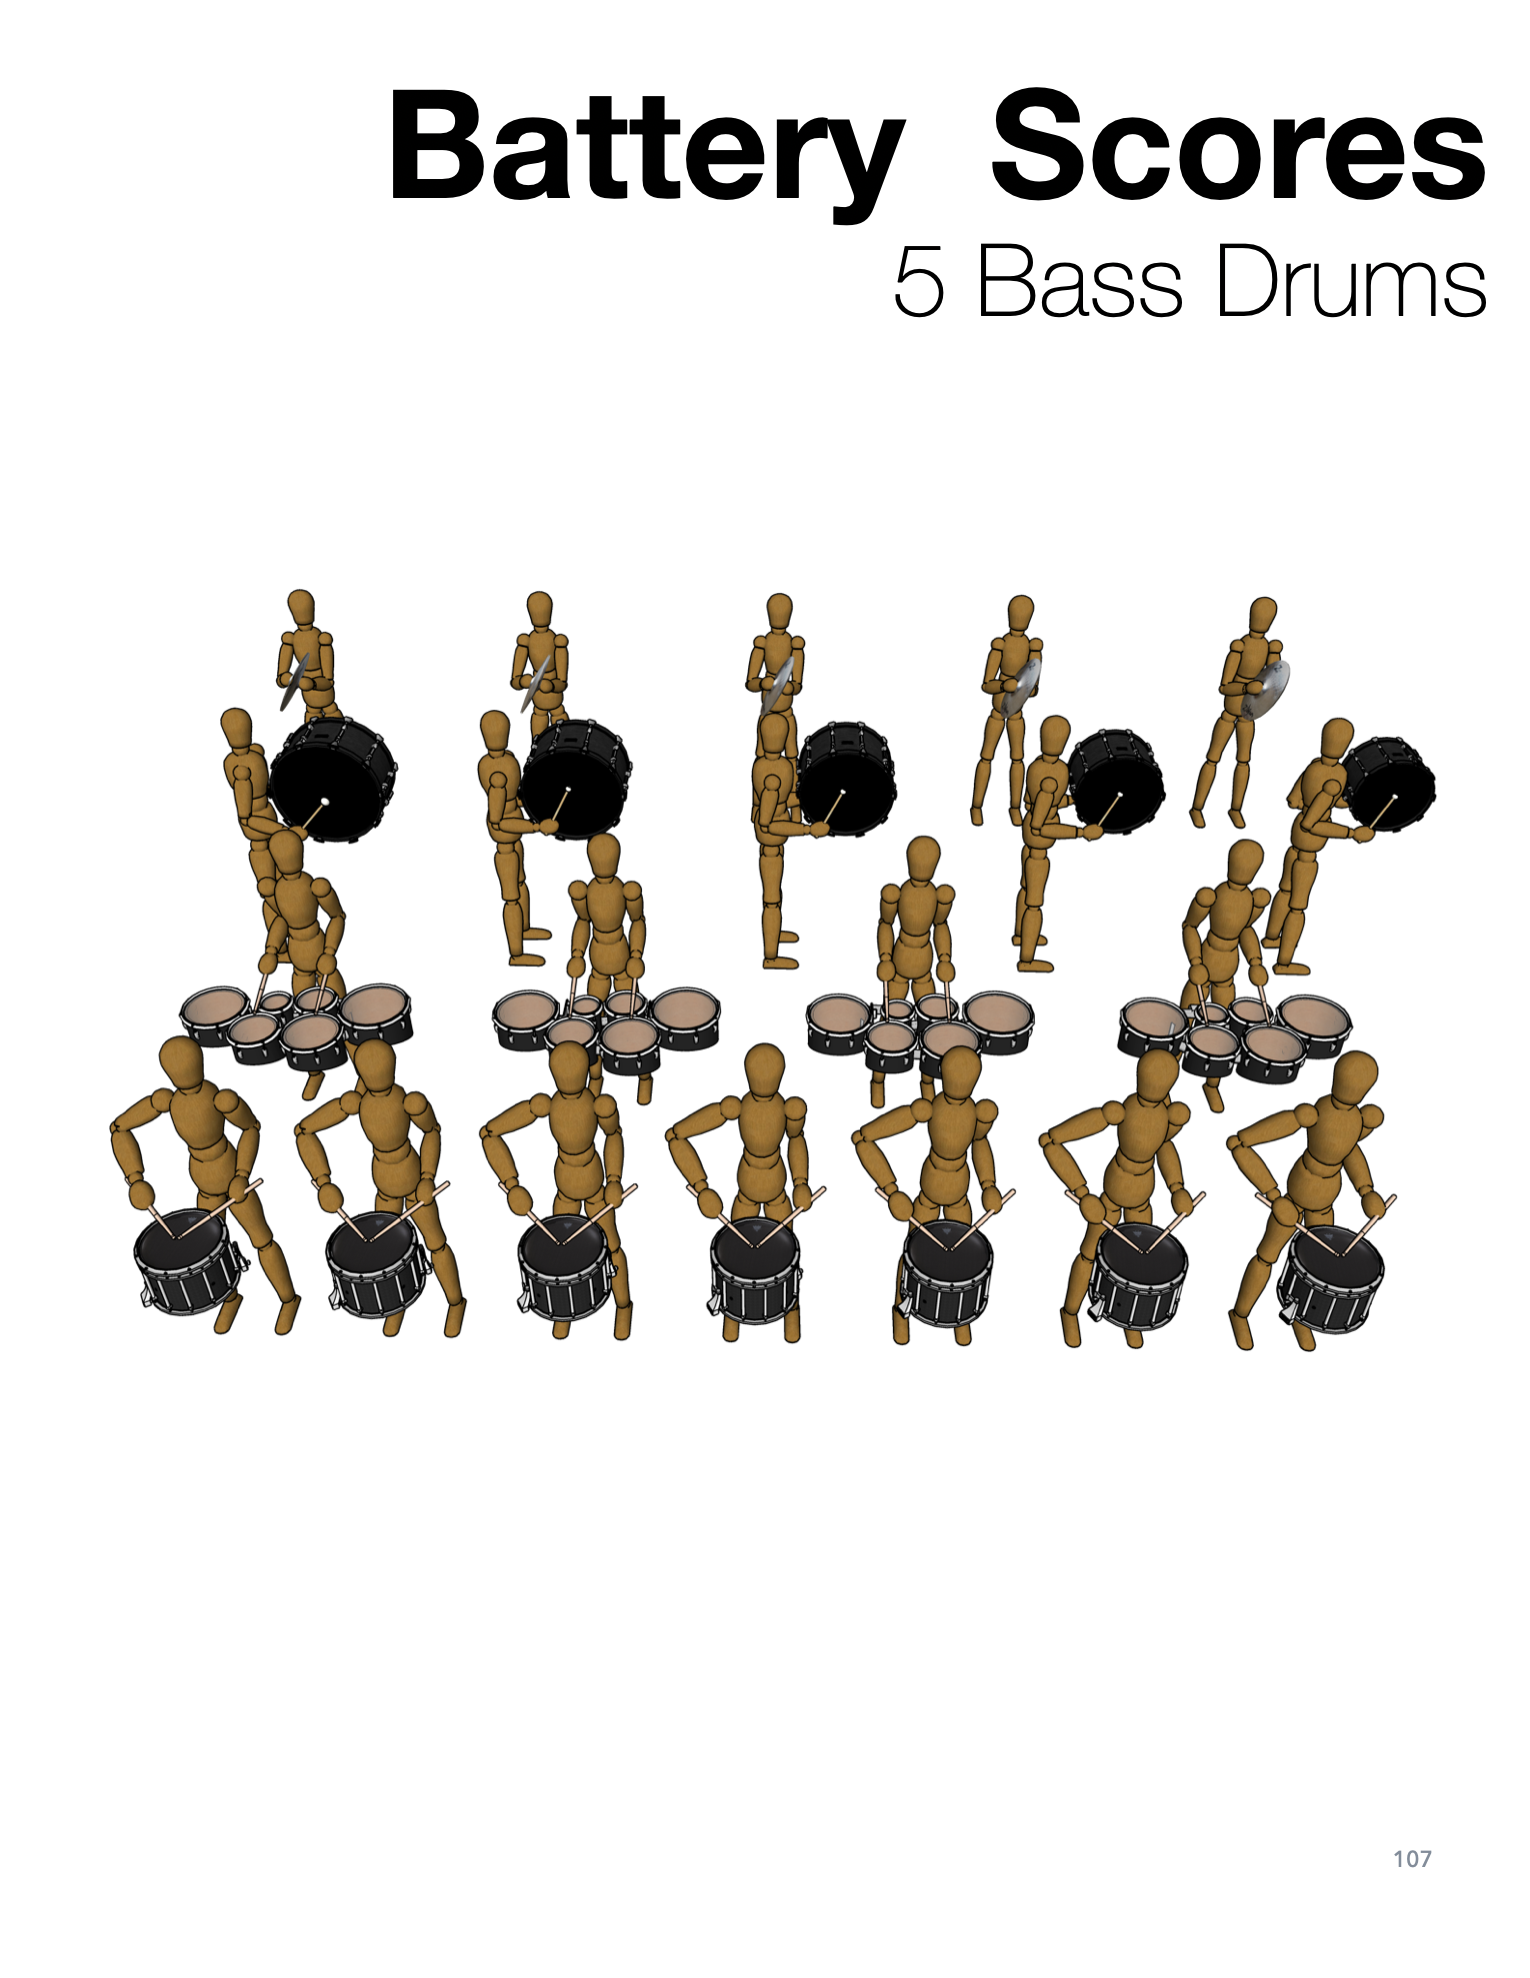 Daily Workout for Drums Book Images - 8.png